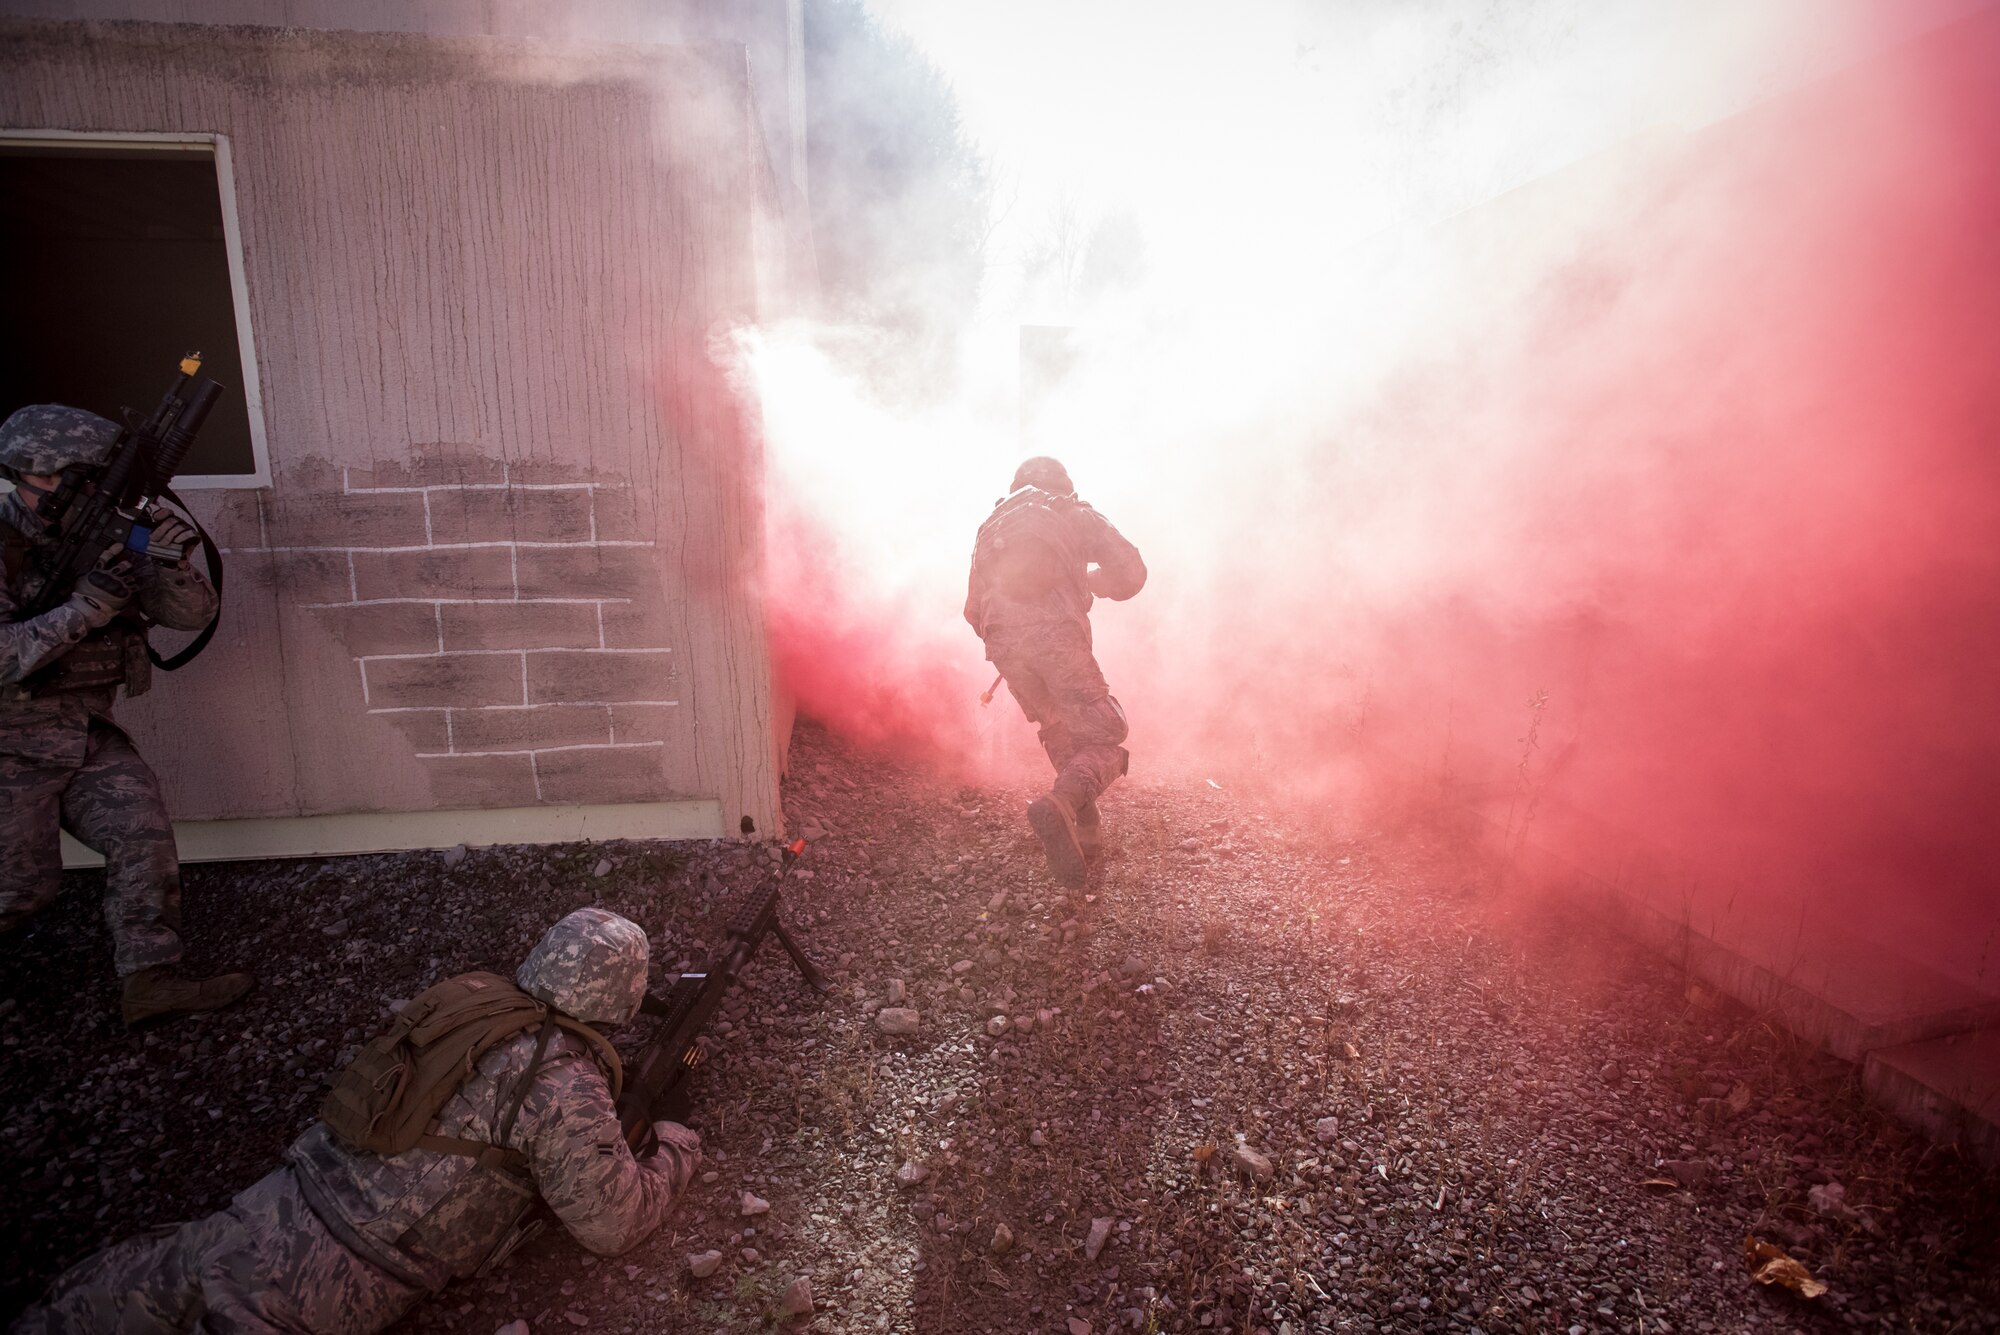 Fire Team members from the Kentucky Air National Guard’s 123rd Security Forces Squadron conduct training to recover a downed pilot inside a simulated Afghan Village at Fort Knox, Ky., Oct. 20, 2015. The Airmen were required to execute a coordinated search while defending their positions and engaging hostile enemy forces. (U.S. Air National Guard photo by Maj. Dale Greer)